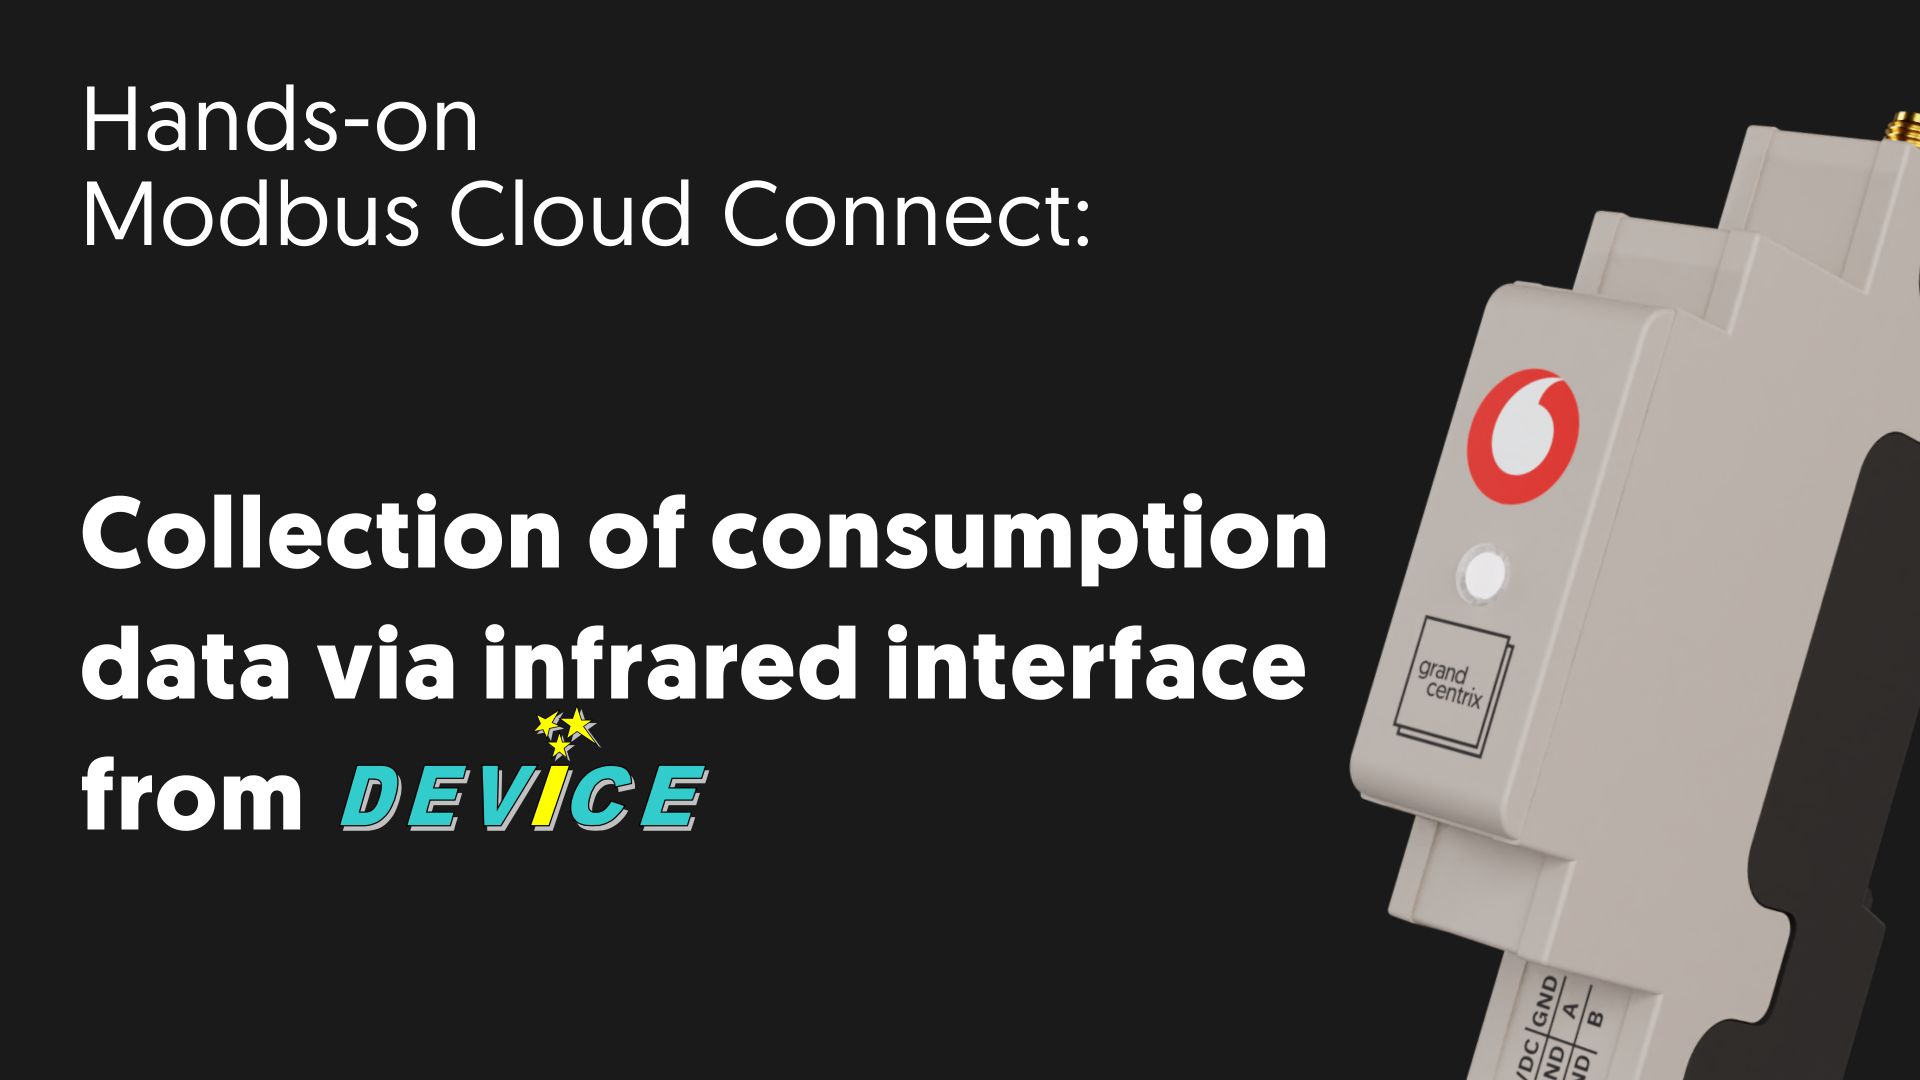 Hands-On Modbus Cloud Connect - Collection of consumption data via infrared interface